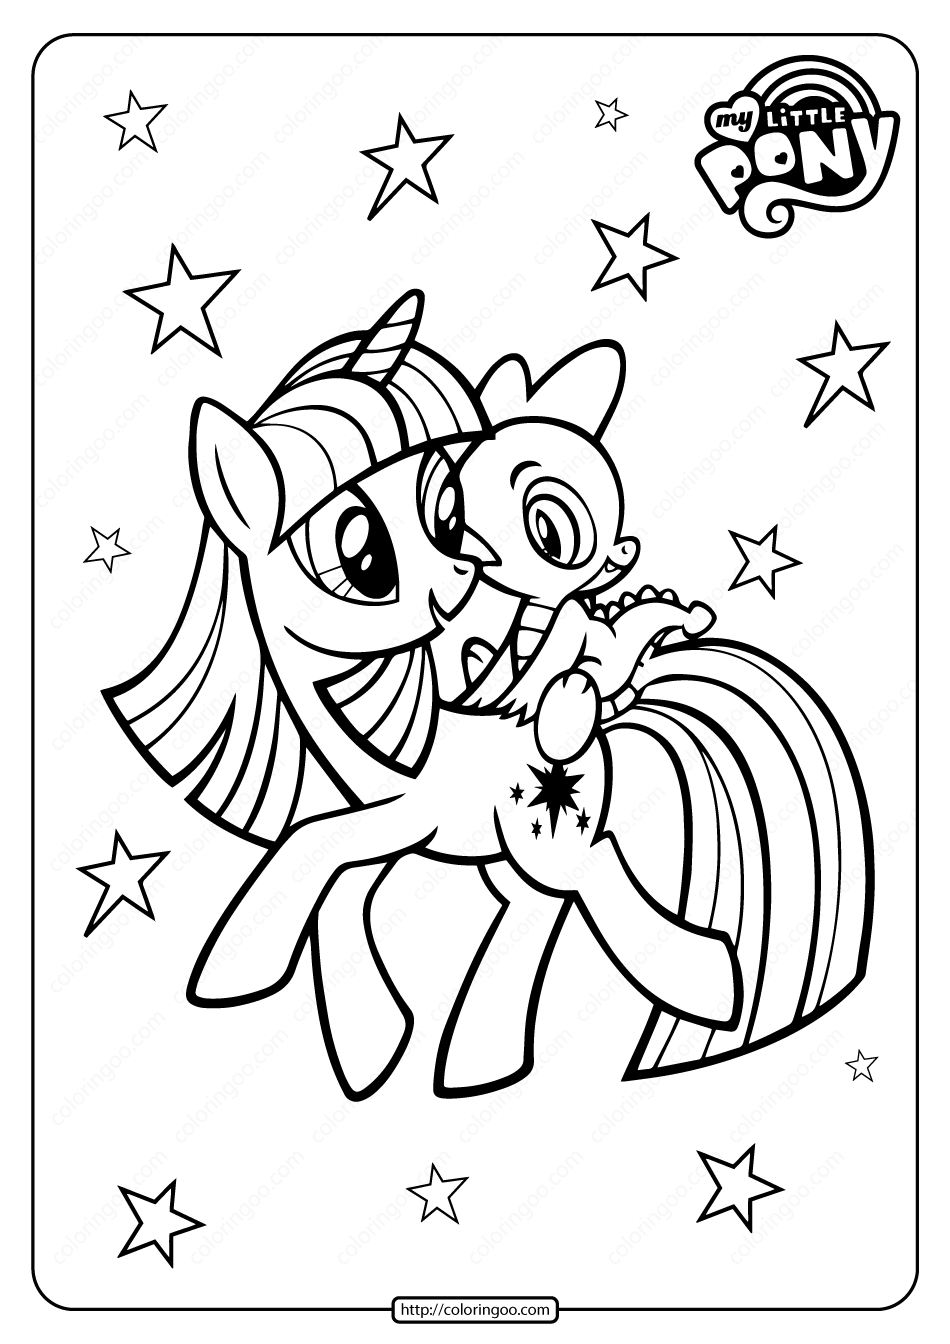 Printable MLP Twilight Sparkle & Spike Coloring Page